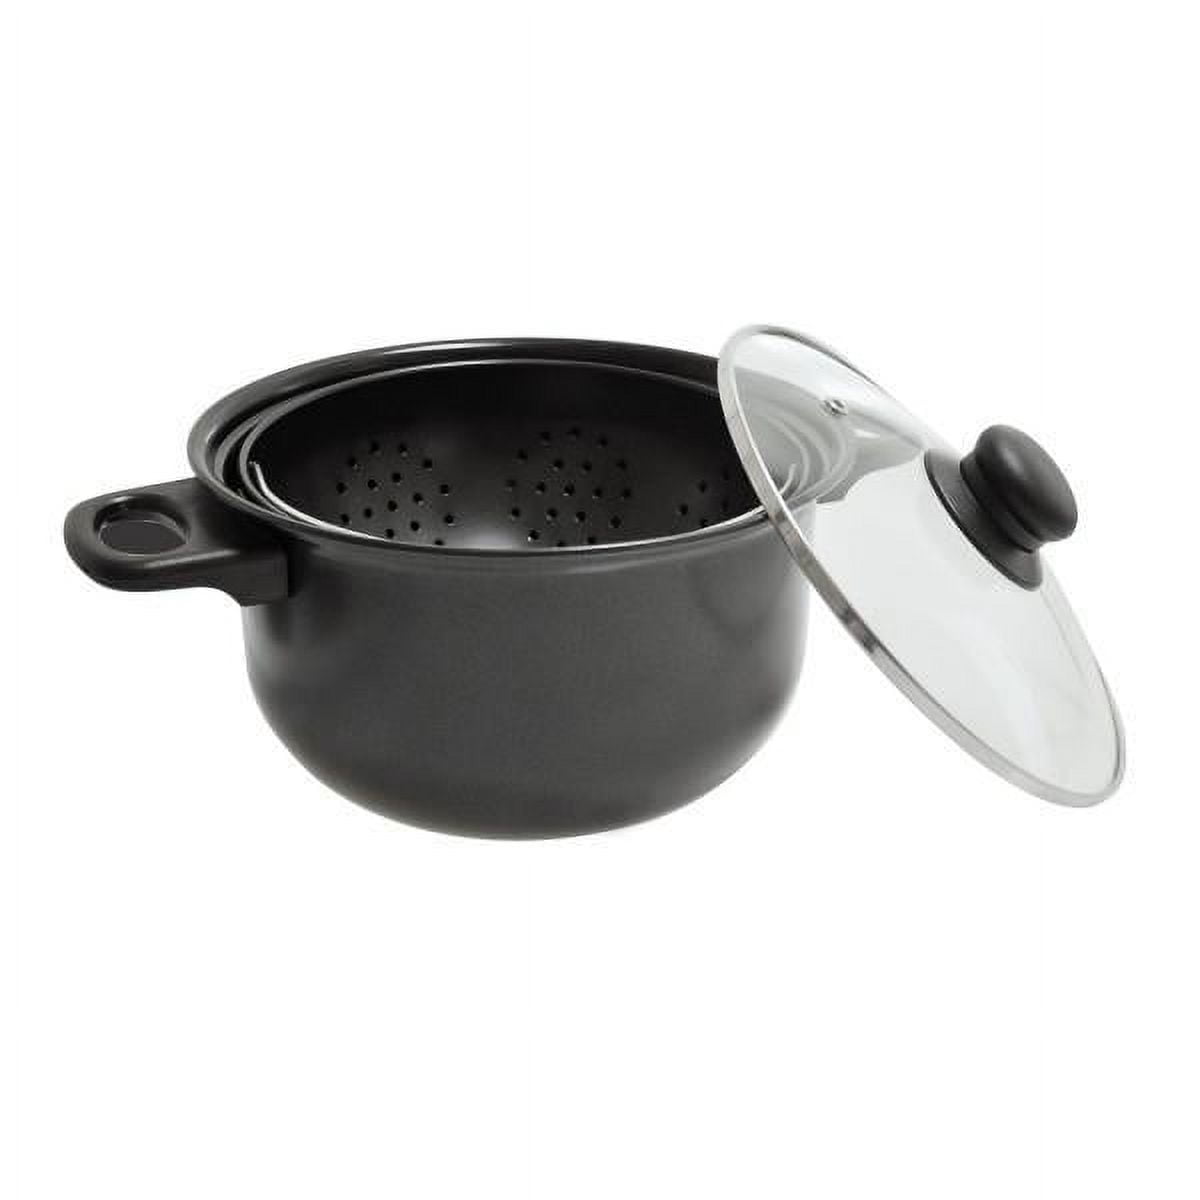 New World's Greatest Cooking Pot “As Seen On TV” 3 pc set 6 Qt